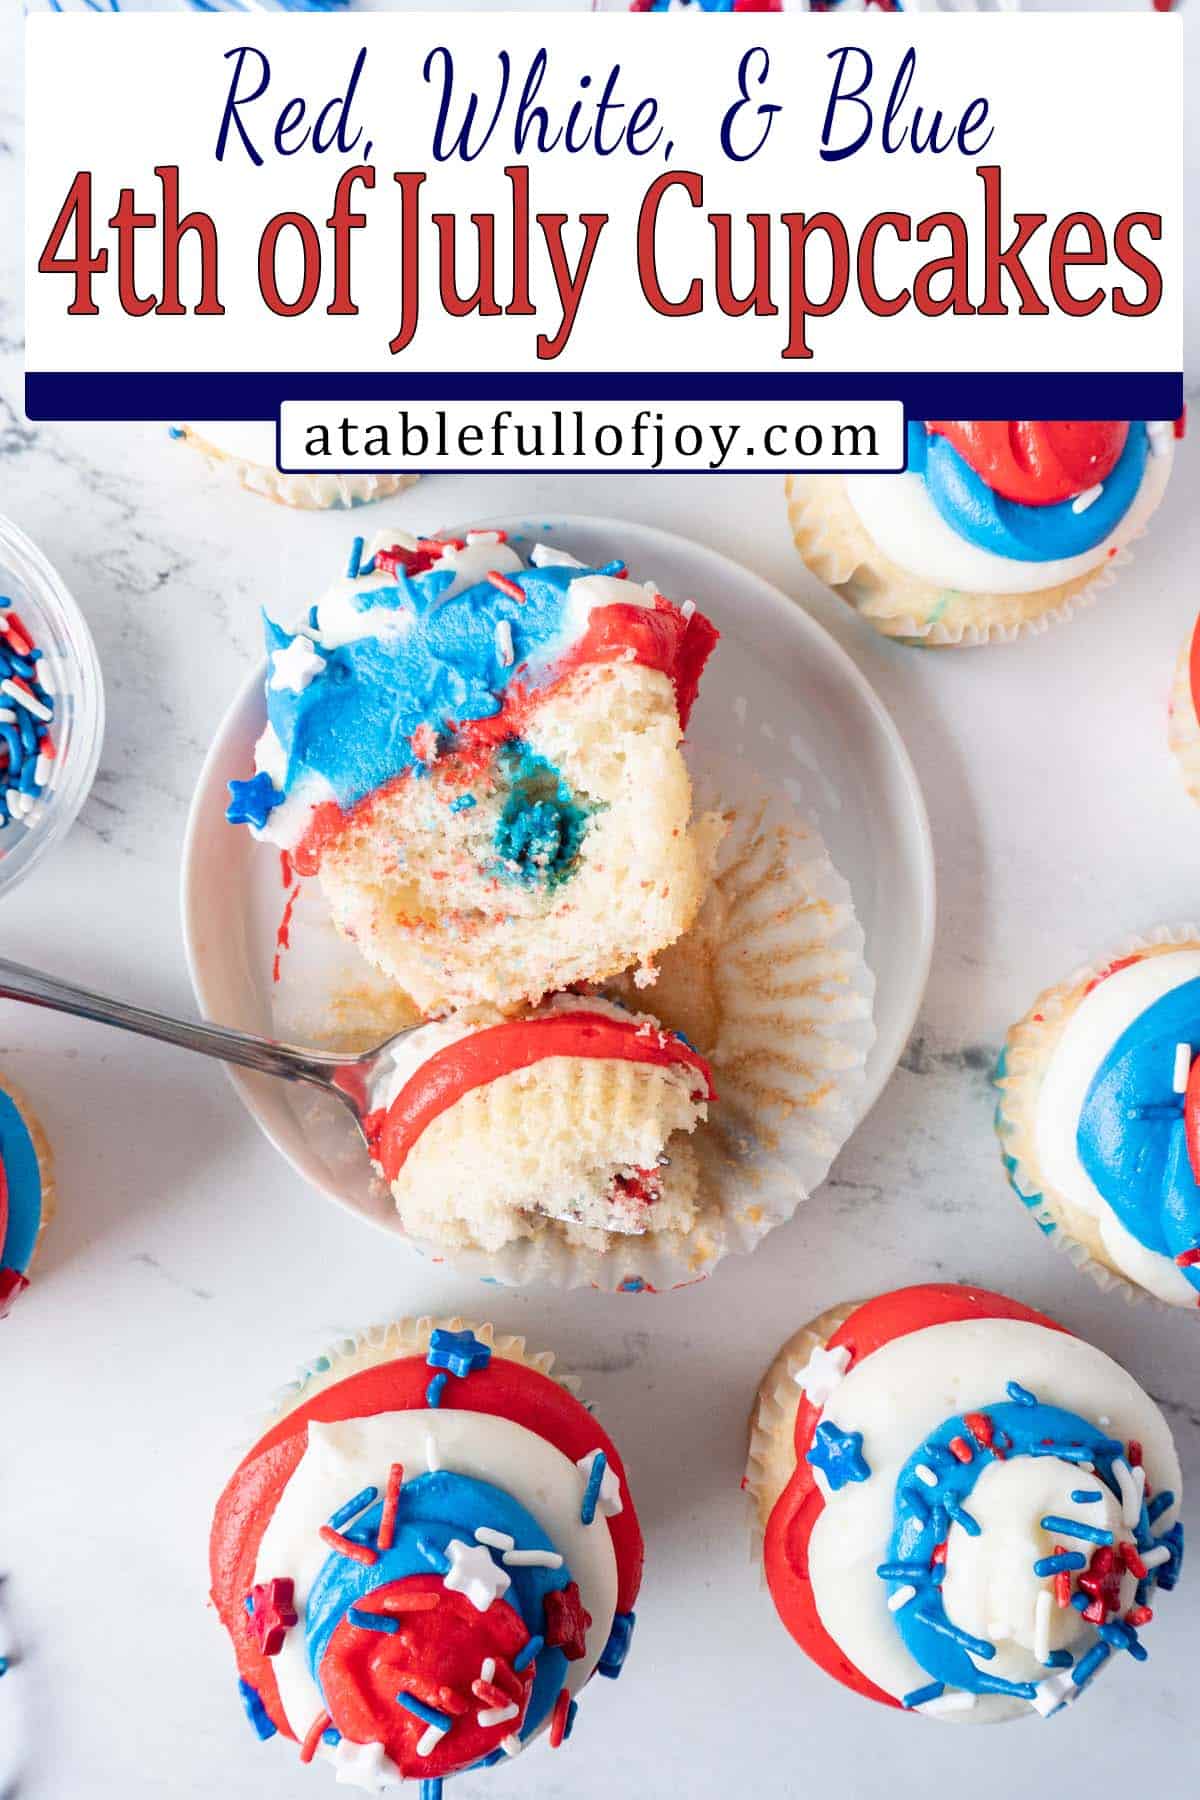 red white and blue cupcakes pinterest image